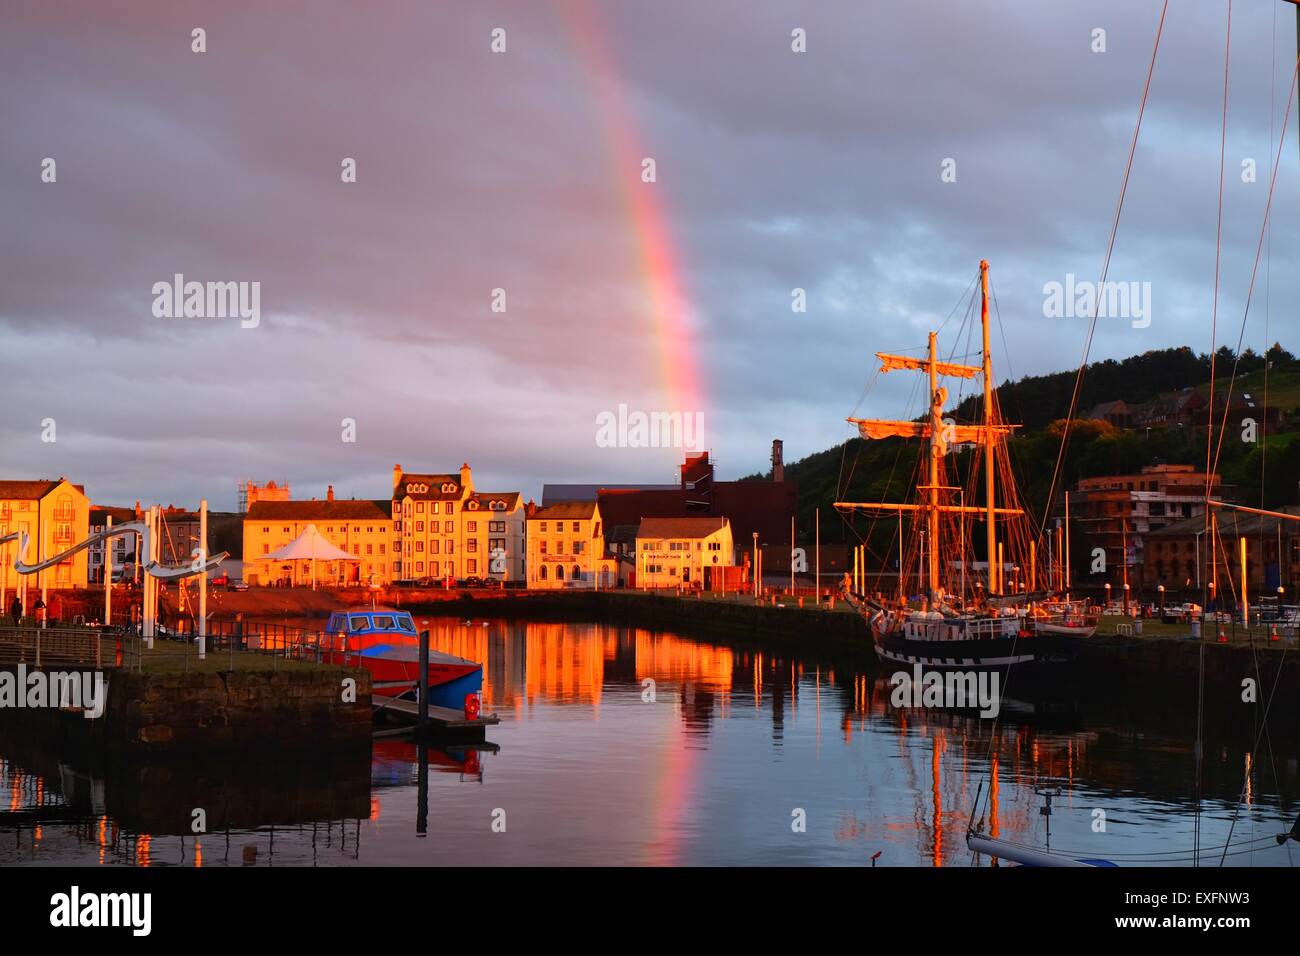 The Lake District, Whitehaven, Cumbria, UK. 13 July 2015. After a muggy day of showers and mist Whitehaven Is treated to a spectacular sunset view and rainbow across the harbour. Credit:  Tom Corban/Alamy Live News Stock Photo